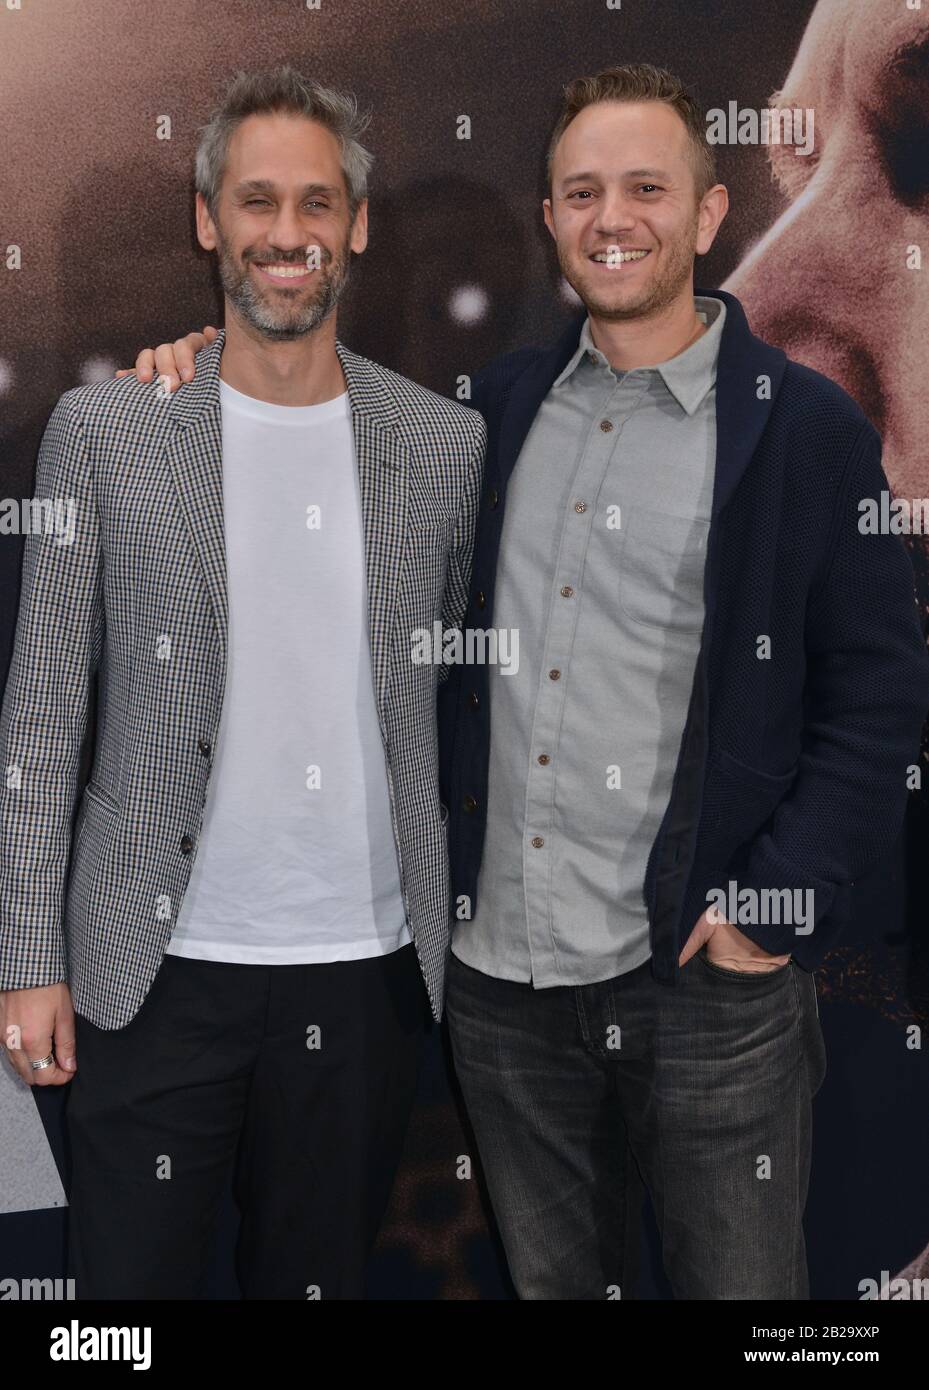 Los Angeles, USA. 01st Mar, 2020. Gabe Hilfer, Rob Simonsen 087 attend the premiere of Warner Bros Pictures' ' The Way Back' at Regal LA Live on March 01, 2020 in Los Angeles, California. Credit: Tsuni/USA/Alamy Live News Stock Photo